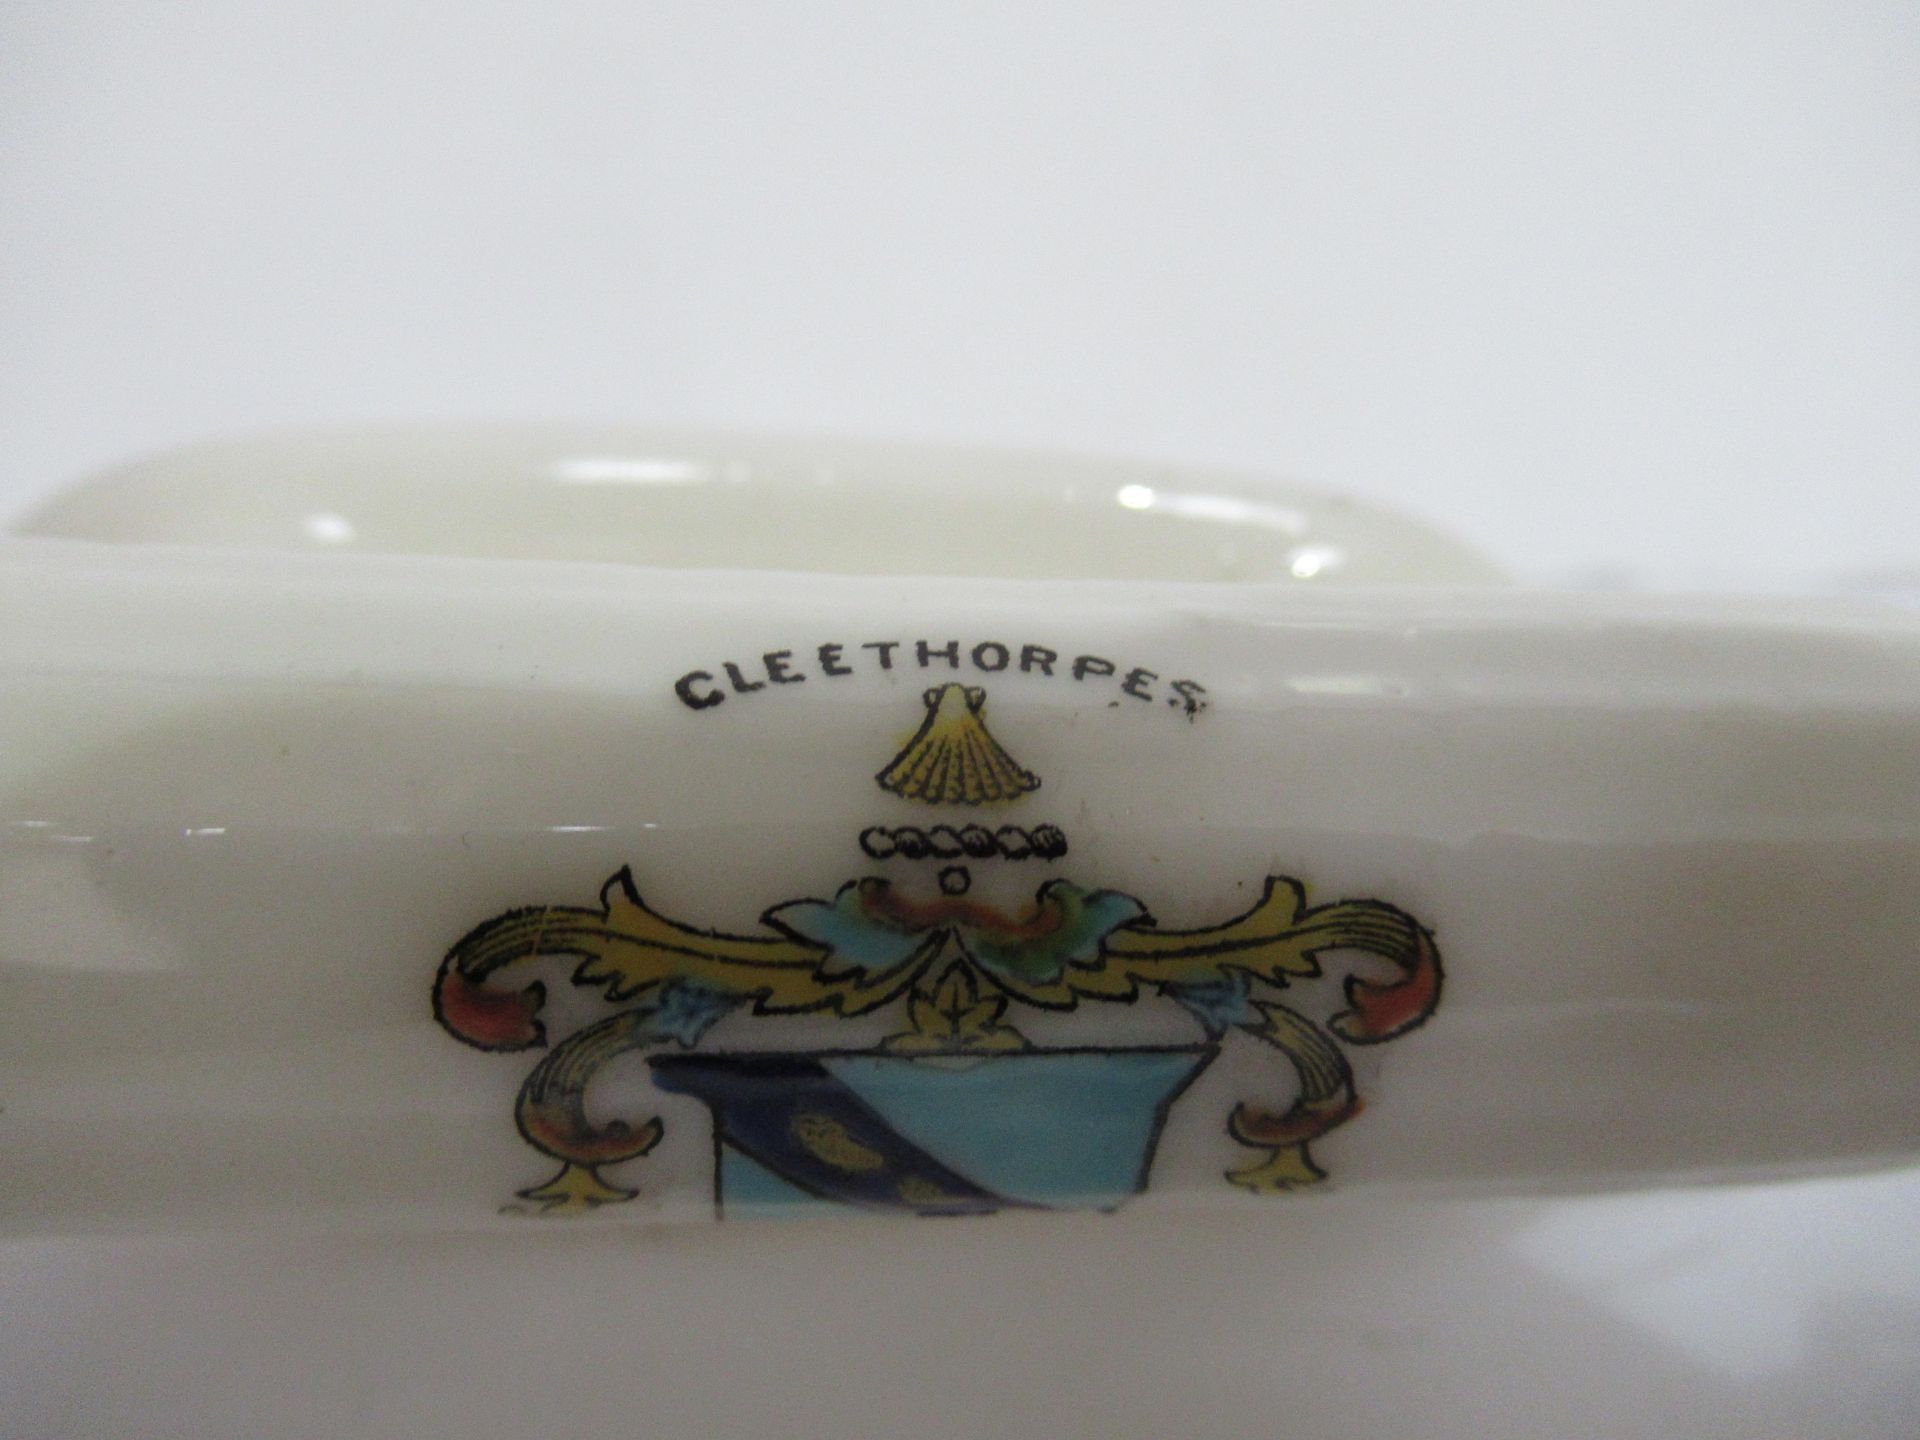 Crested China Alexandra model of airship with Cleethorpes coat of arms - Image 7 of 9